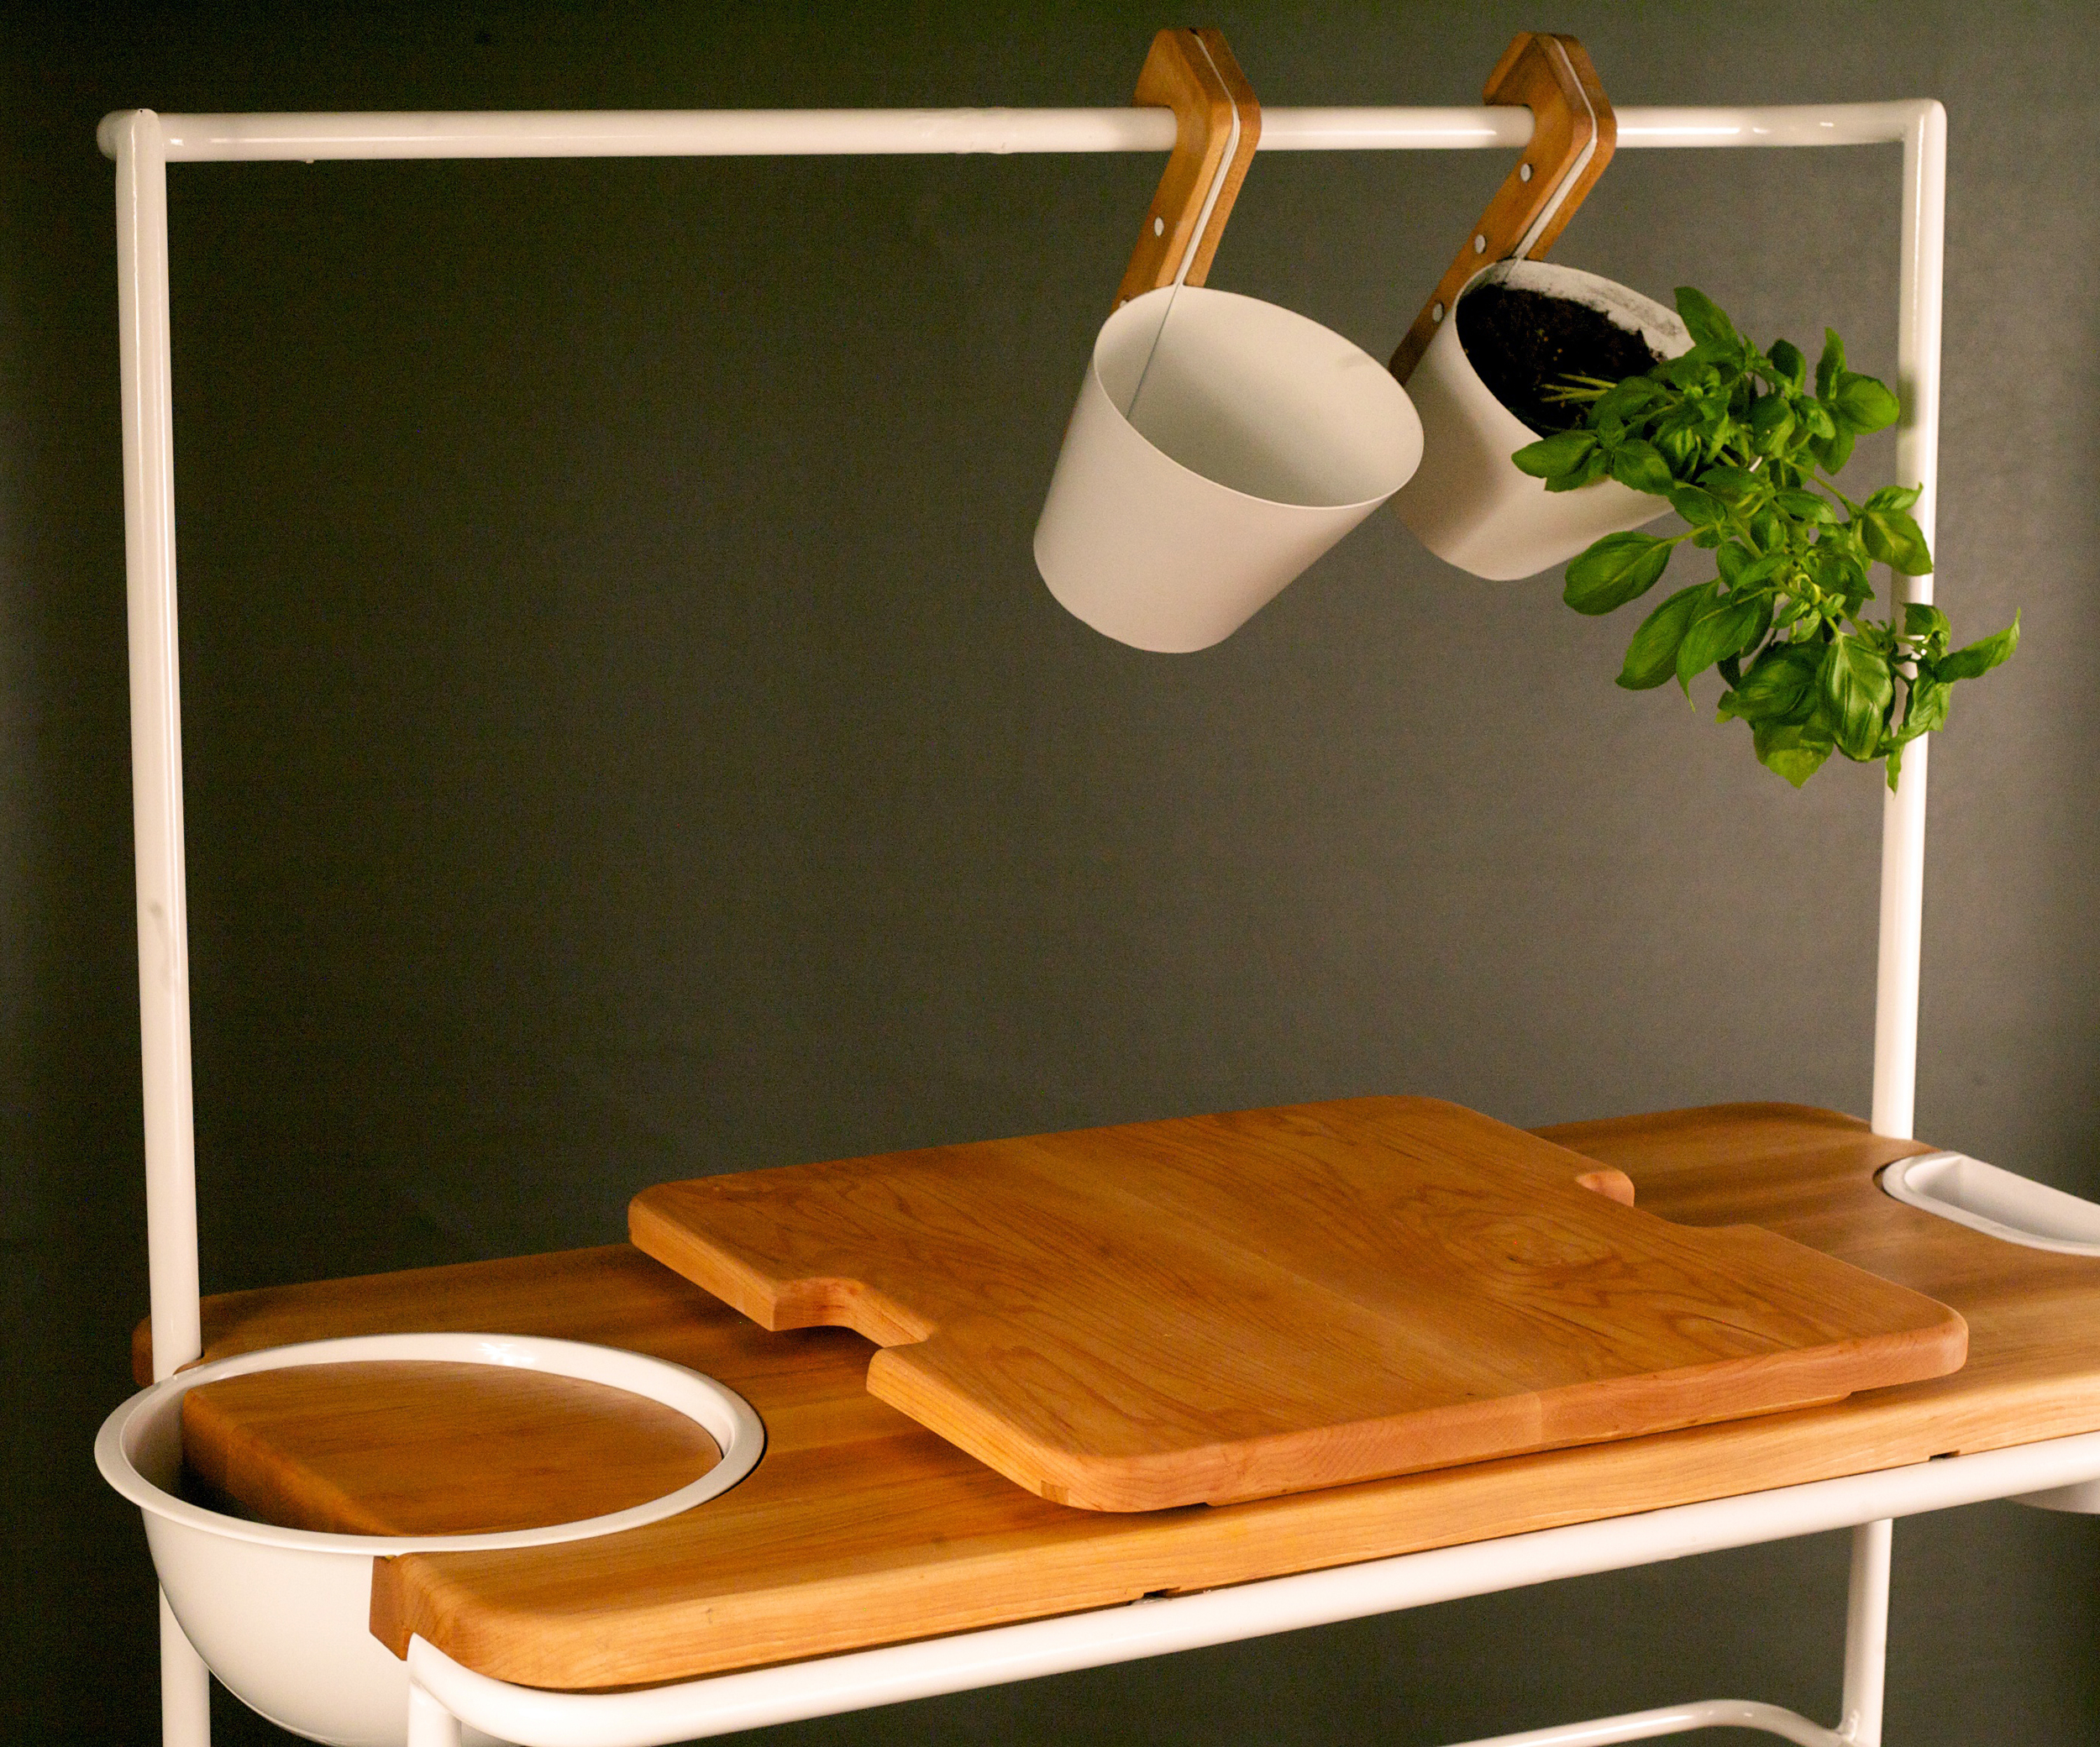 The trays that create the shelves can be removed and carried away.